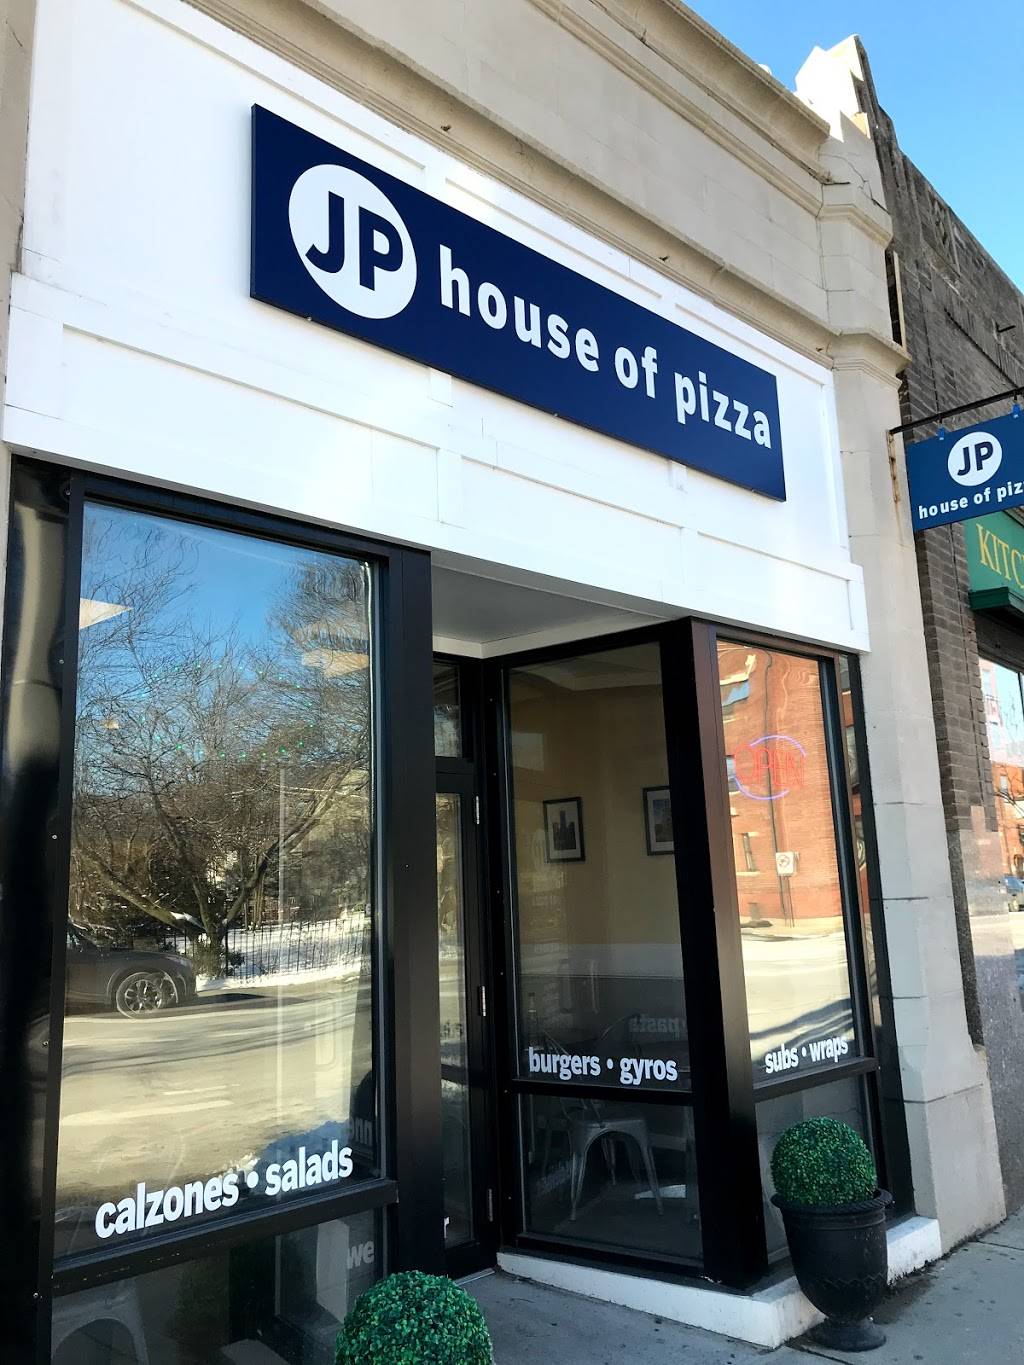 jp house of pizza phone number